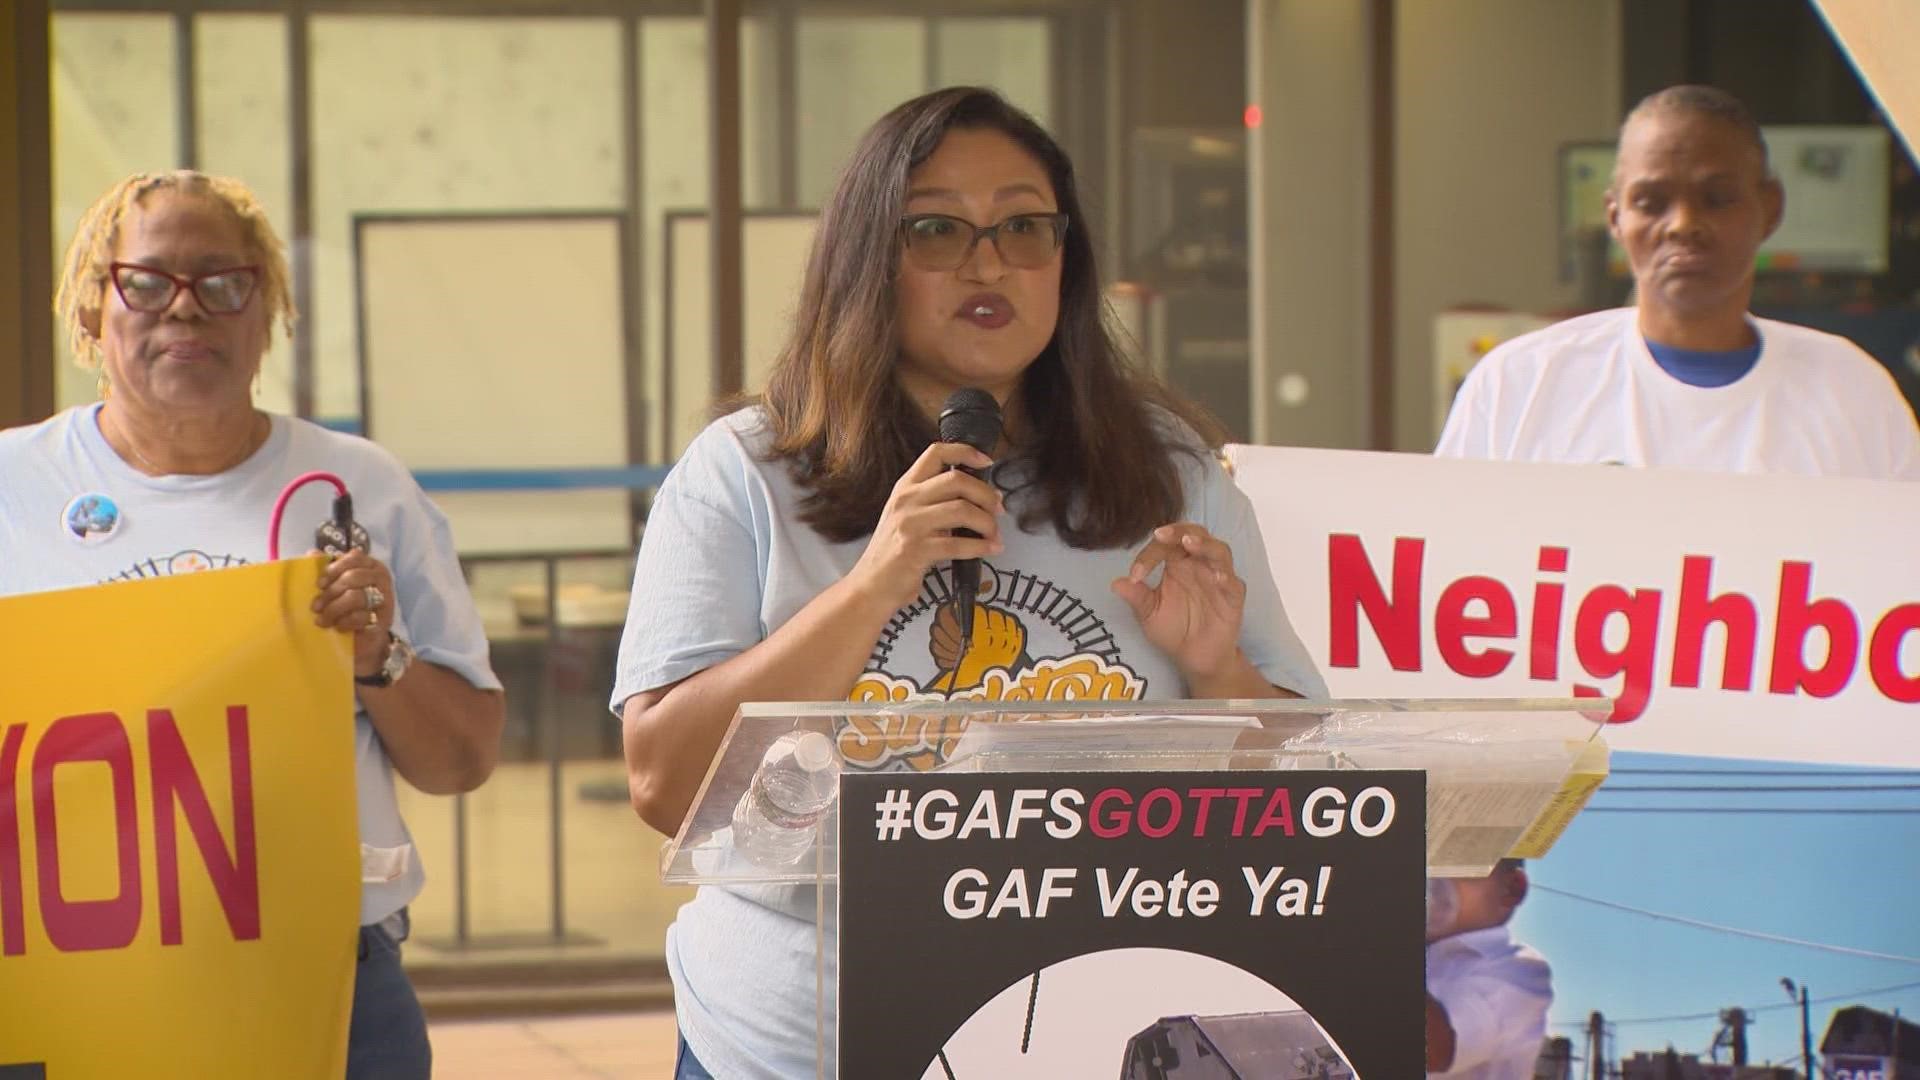 “Nothing will ever fully depict what’s it’s like to live next door to GAF,” Janie Cisneros told the crowd outside city hall.